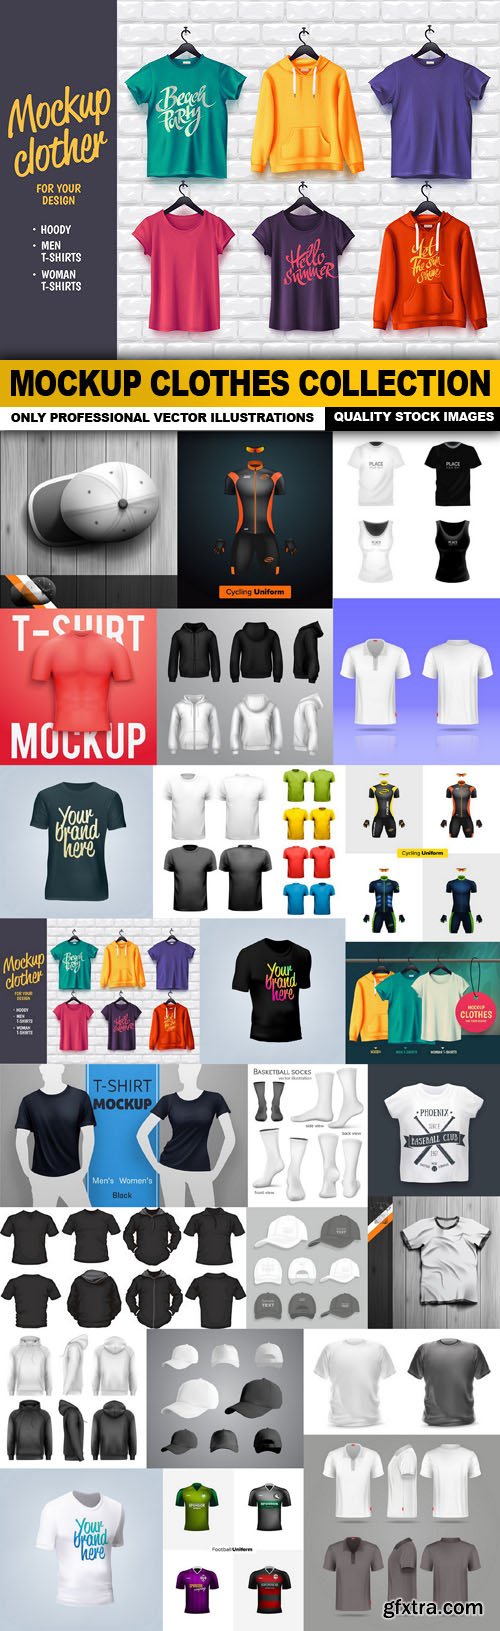 Mockup Clothes Collection - 25 Vector